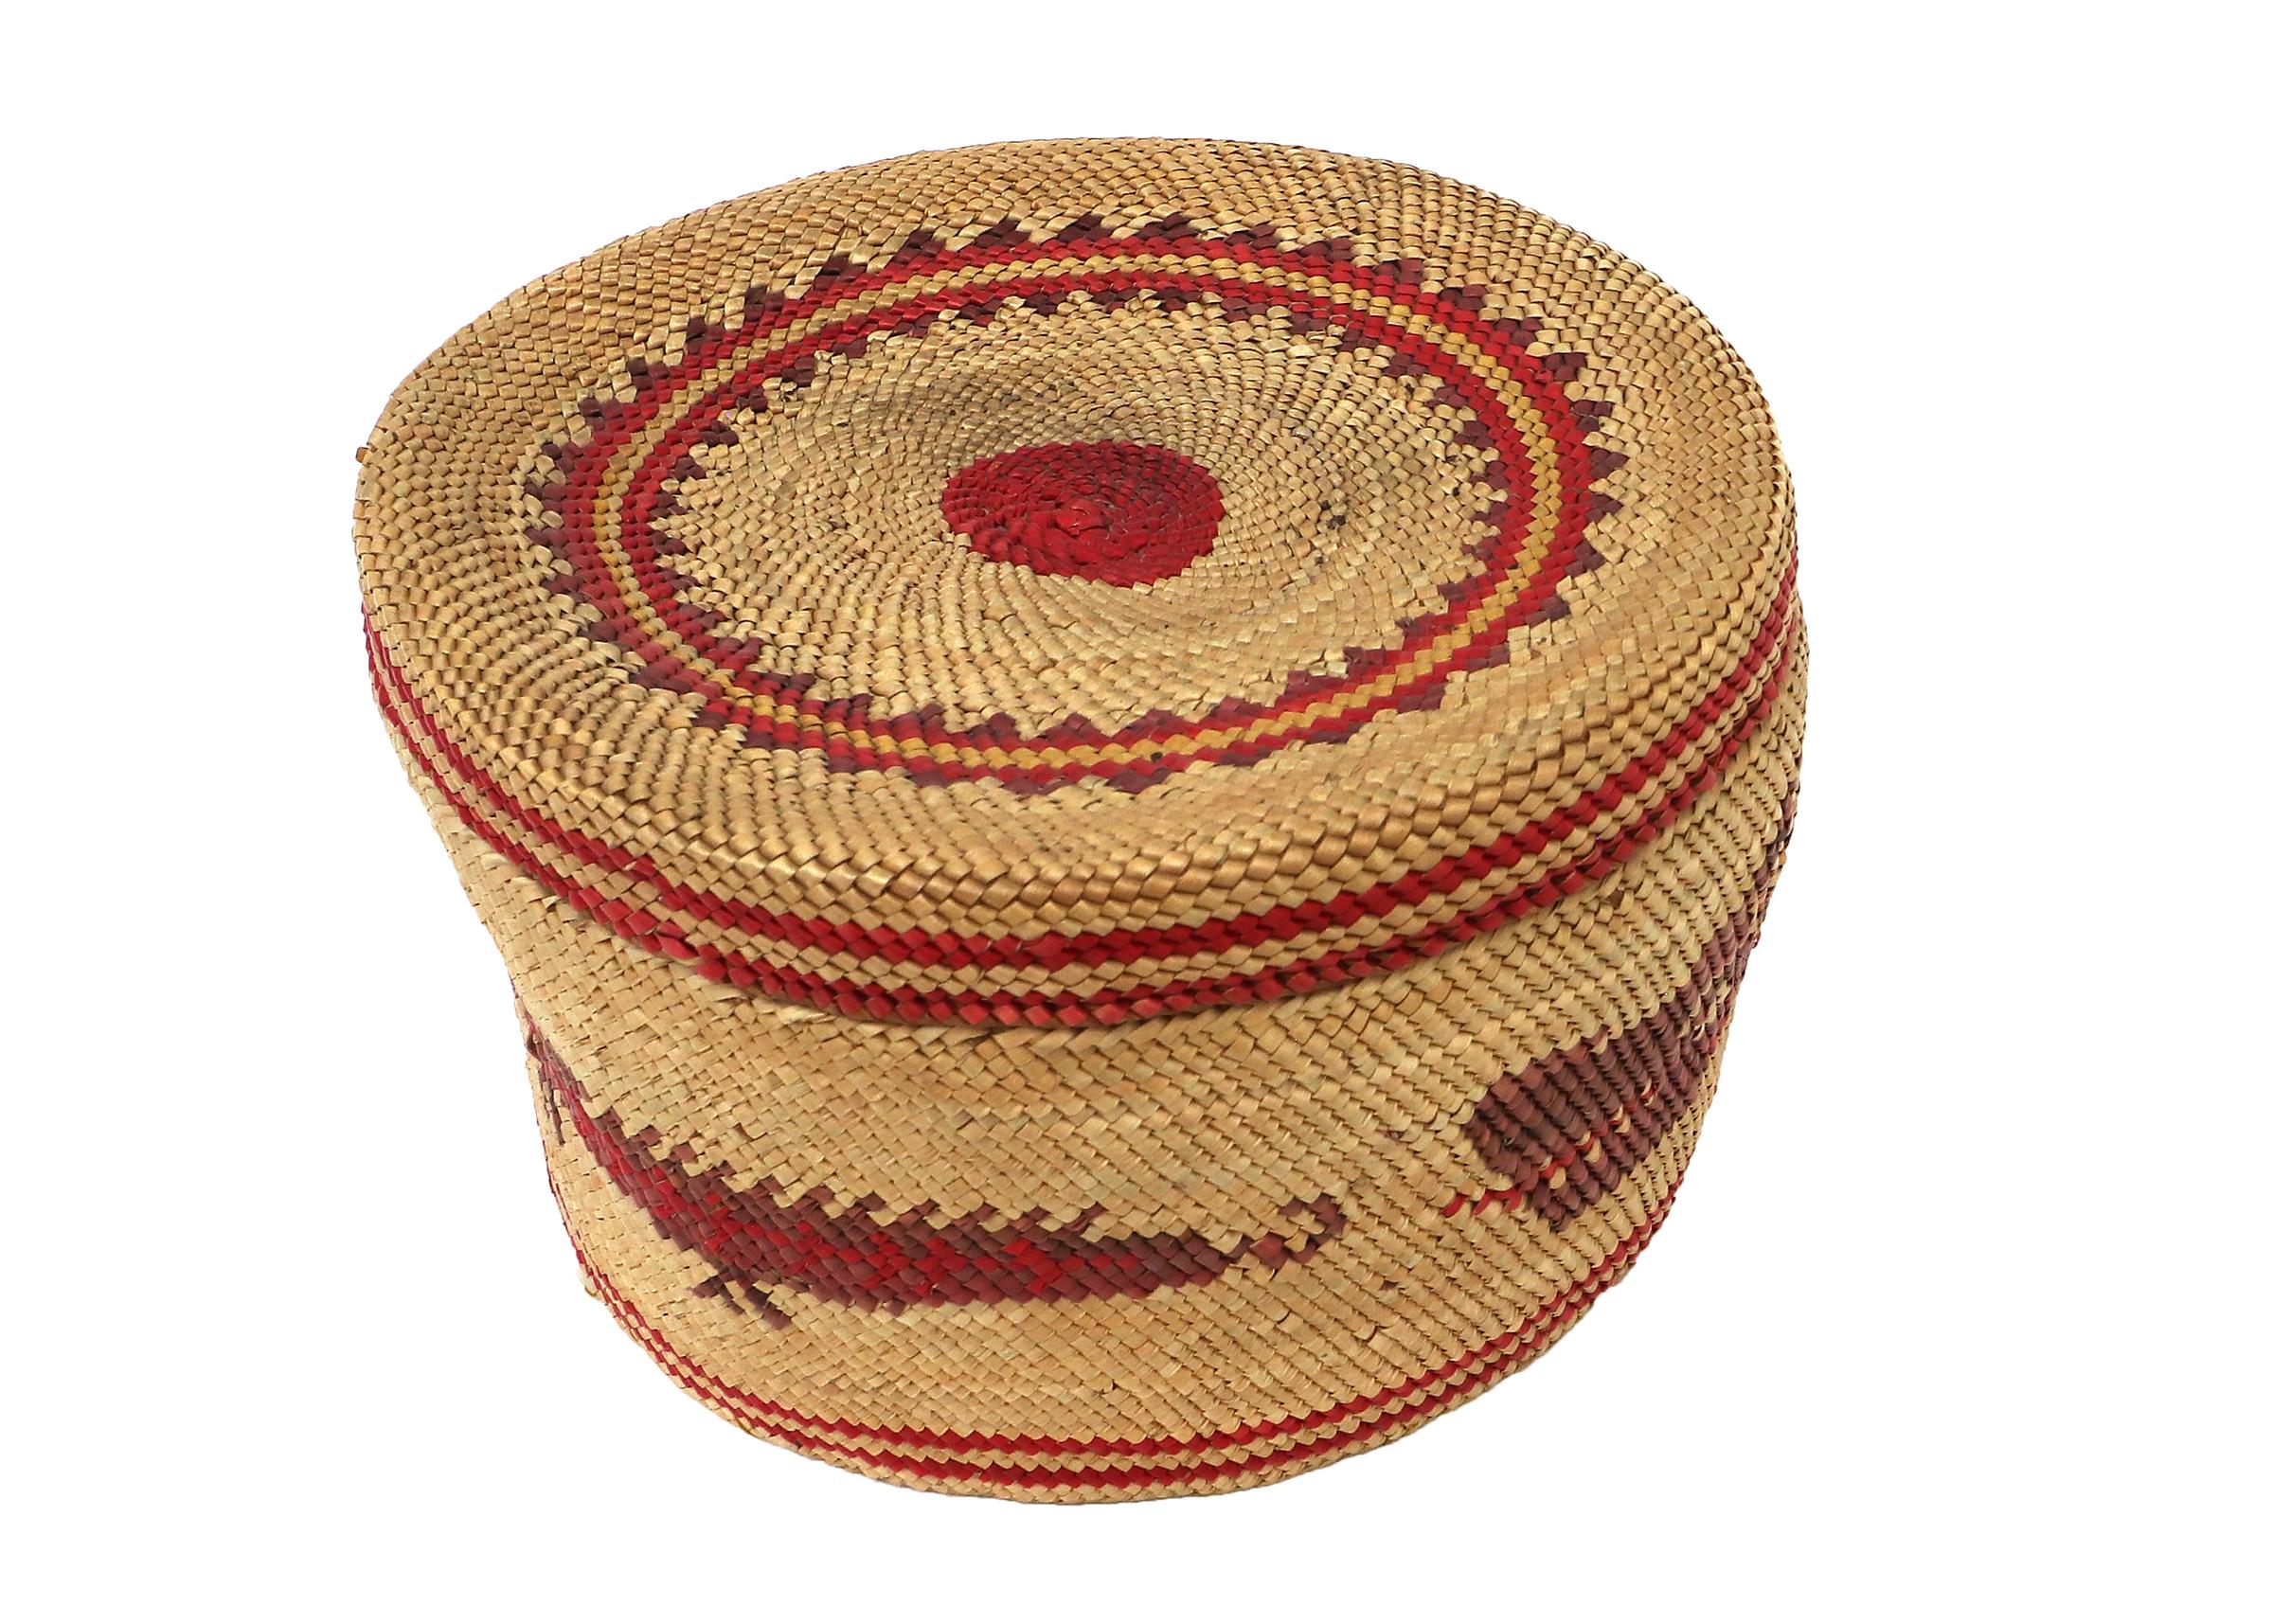 Nootka Northwest Coast 1900 Woven Basket with Top, Red and Black Designs For Sale 2